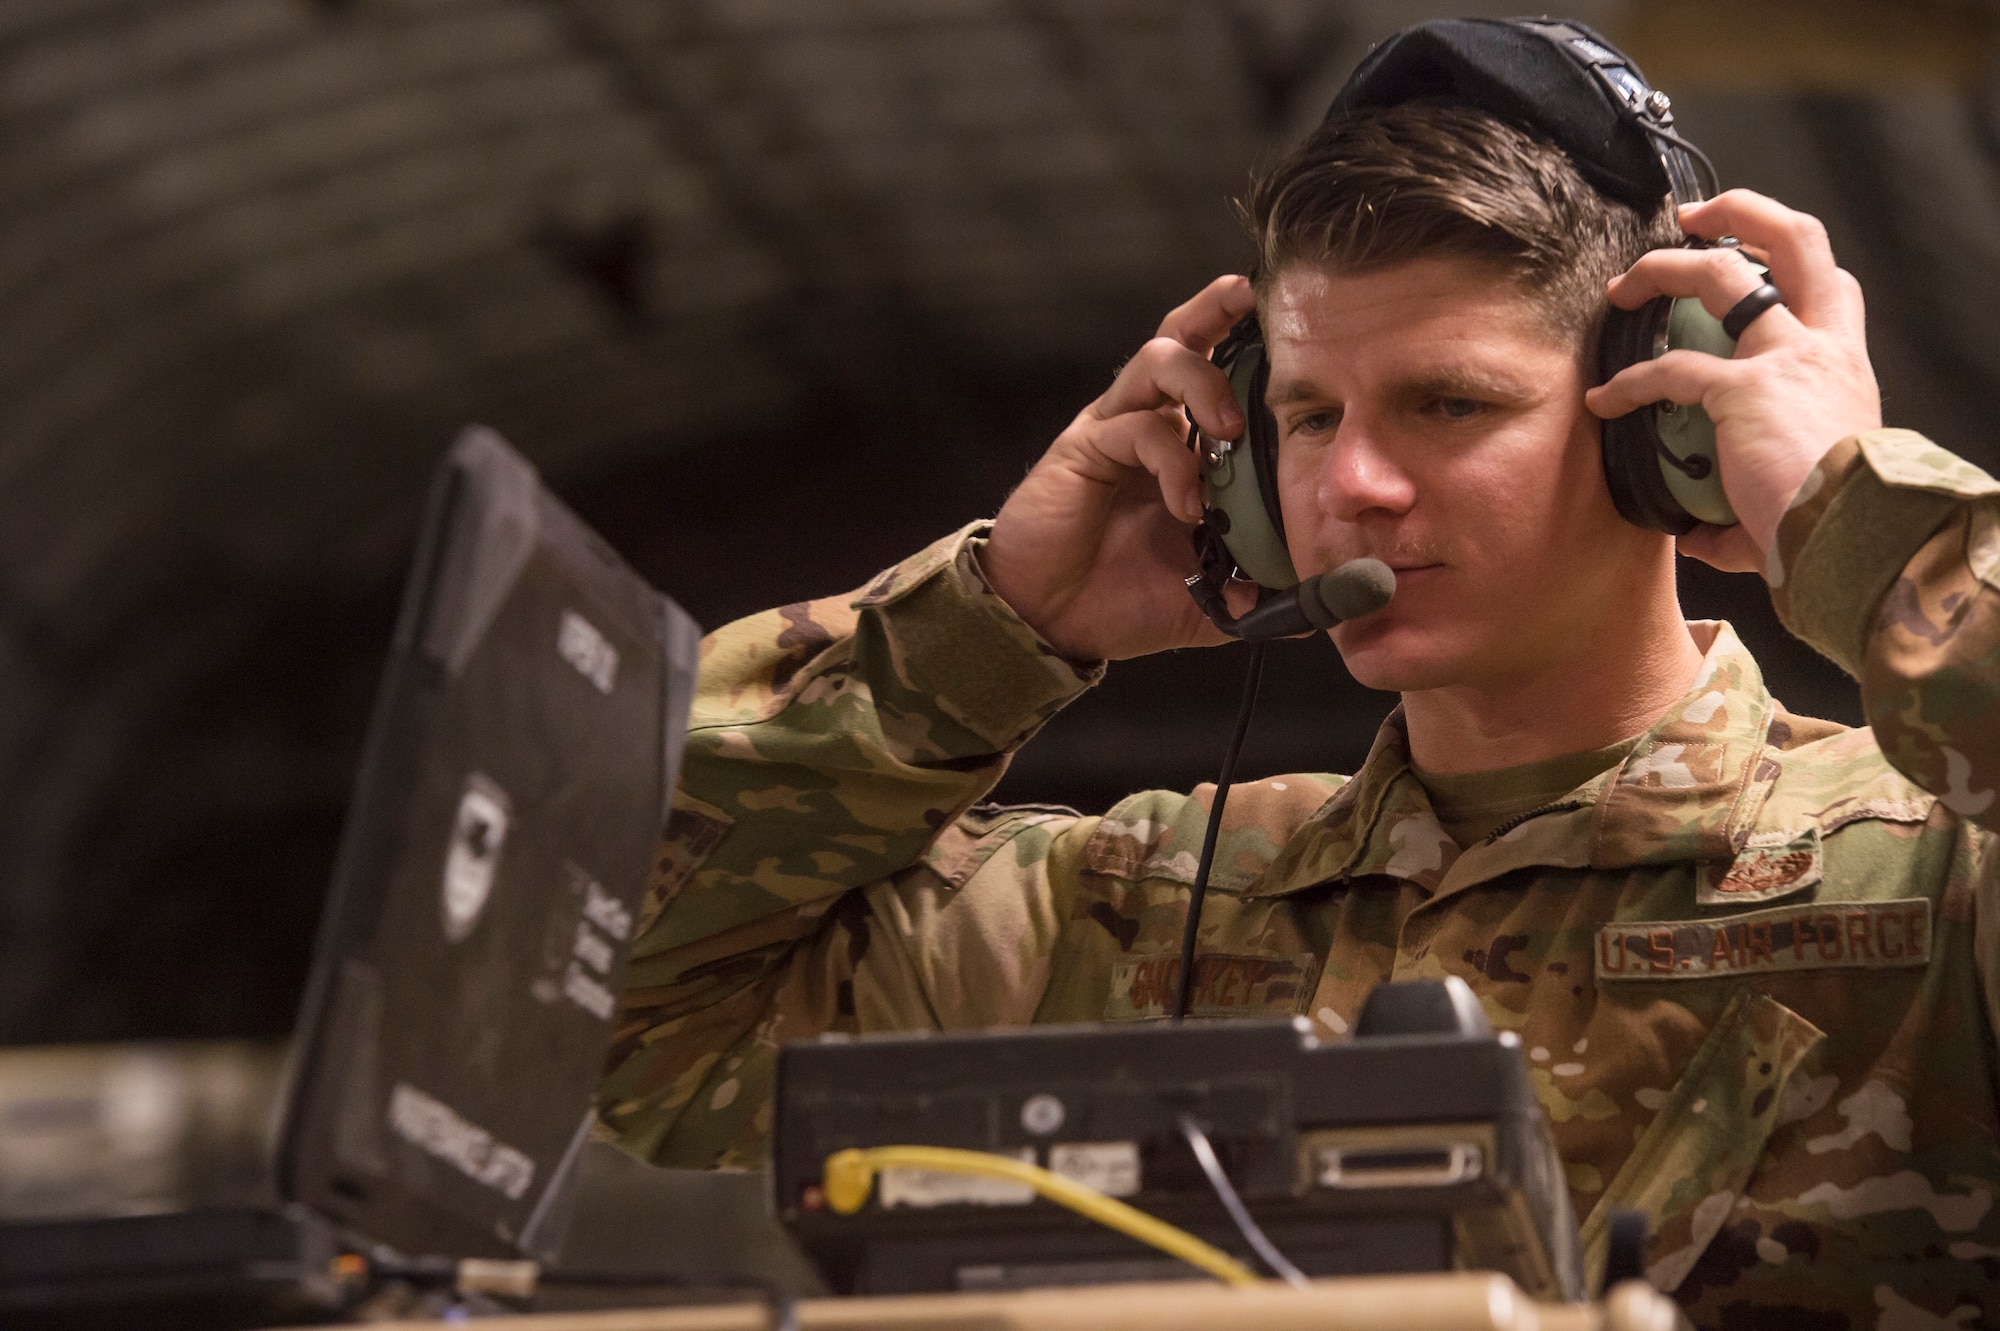 Tech. Sgt. Stephen Shockey, 379th Expeditionary Communications Squadron Viper team operator, tests the functionality of an “HSD-400” radio system on a C-17 Globemaster III March 5, 2019, at Al Udeid Air Base, Qatar.